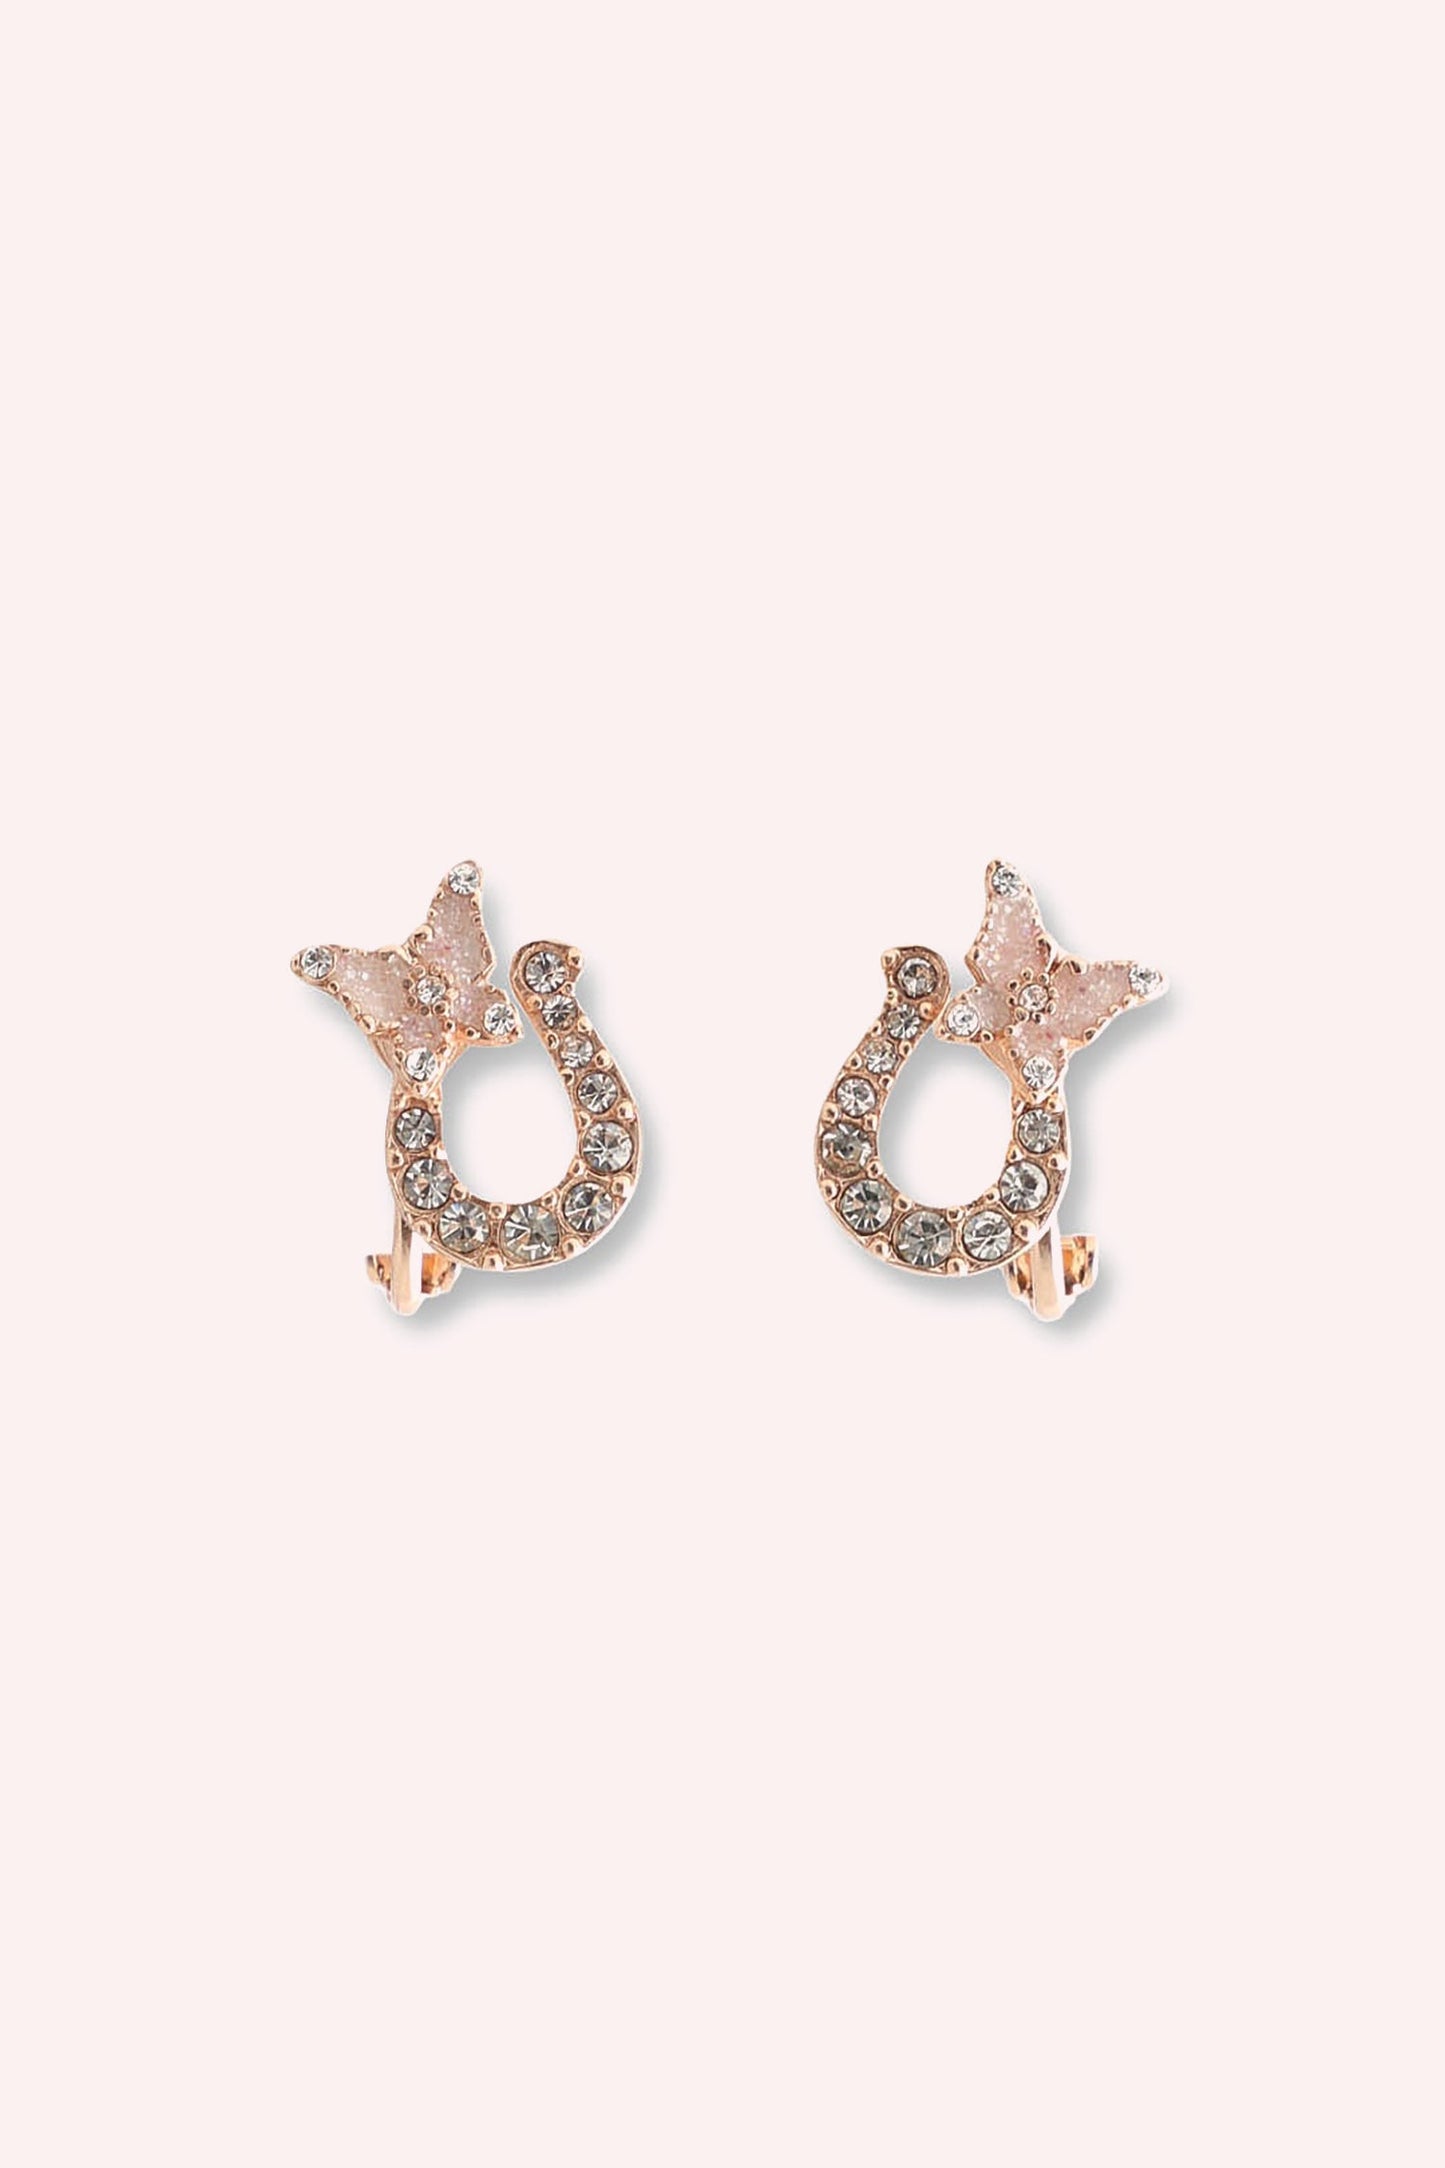 Golden horseshoe Earrings with a butterfly on top, Adorned with Gems